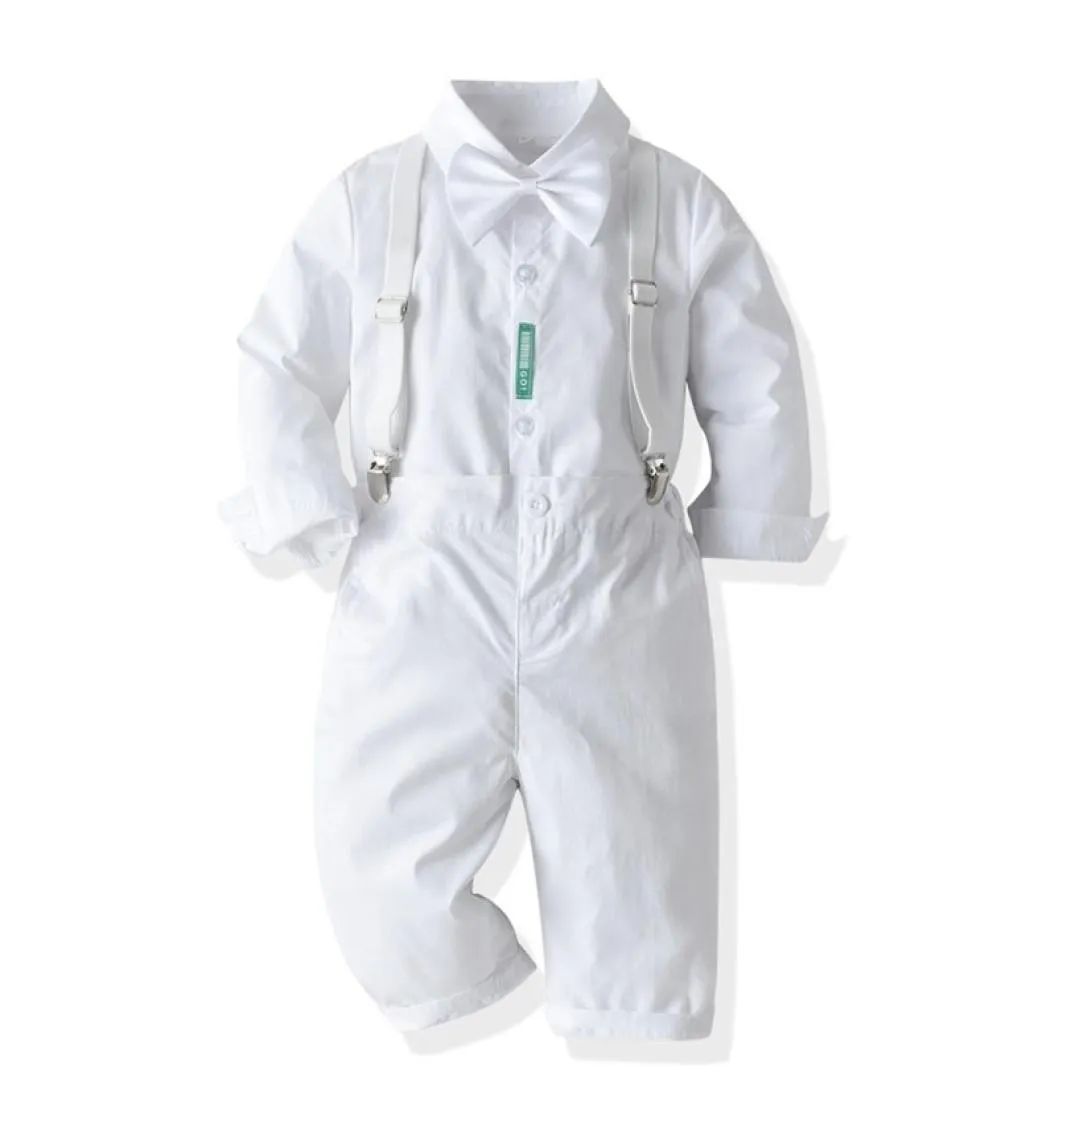 White Toddler Boys Suit Gentleman Clothes Baptism Dress Shirt Bib Pants Solid Party Wedding Handsome Kid Clothing 2108232400573